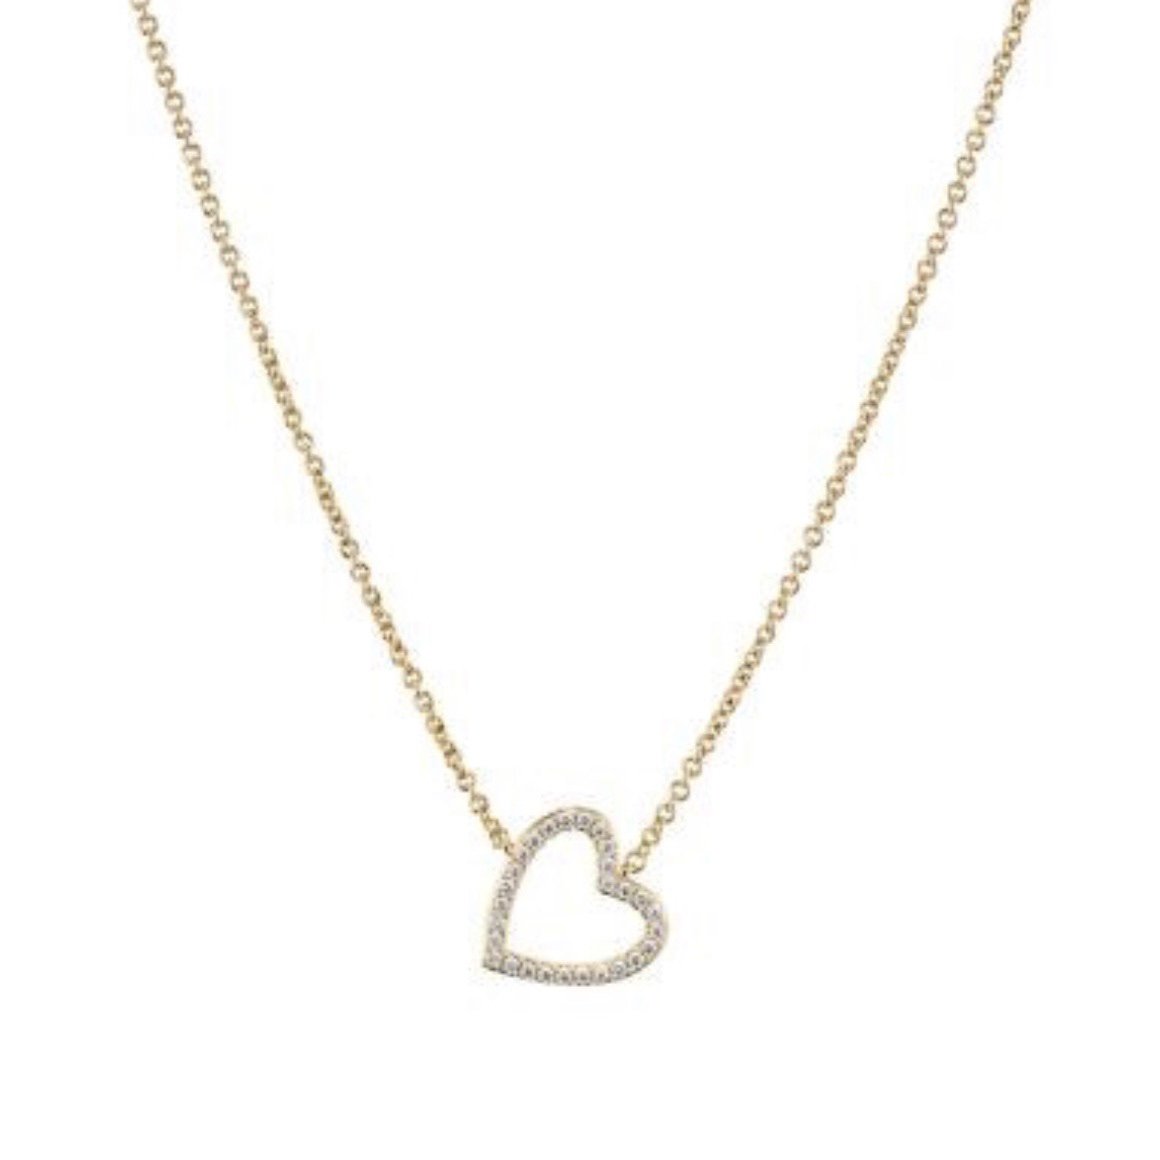 Affordable Valentine's Day Gift Ideas + FREE Shipping - The Double Take ...